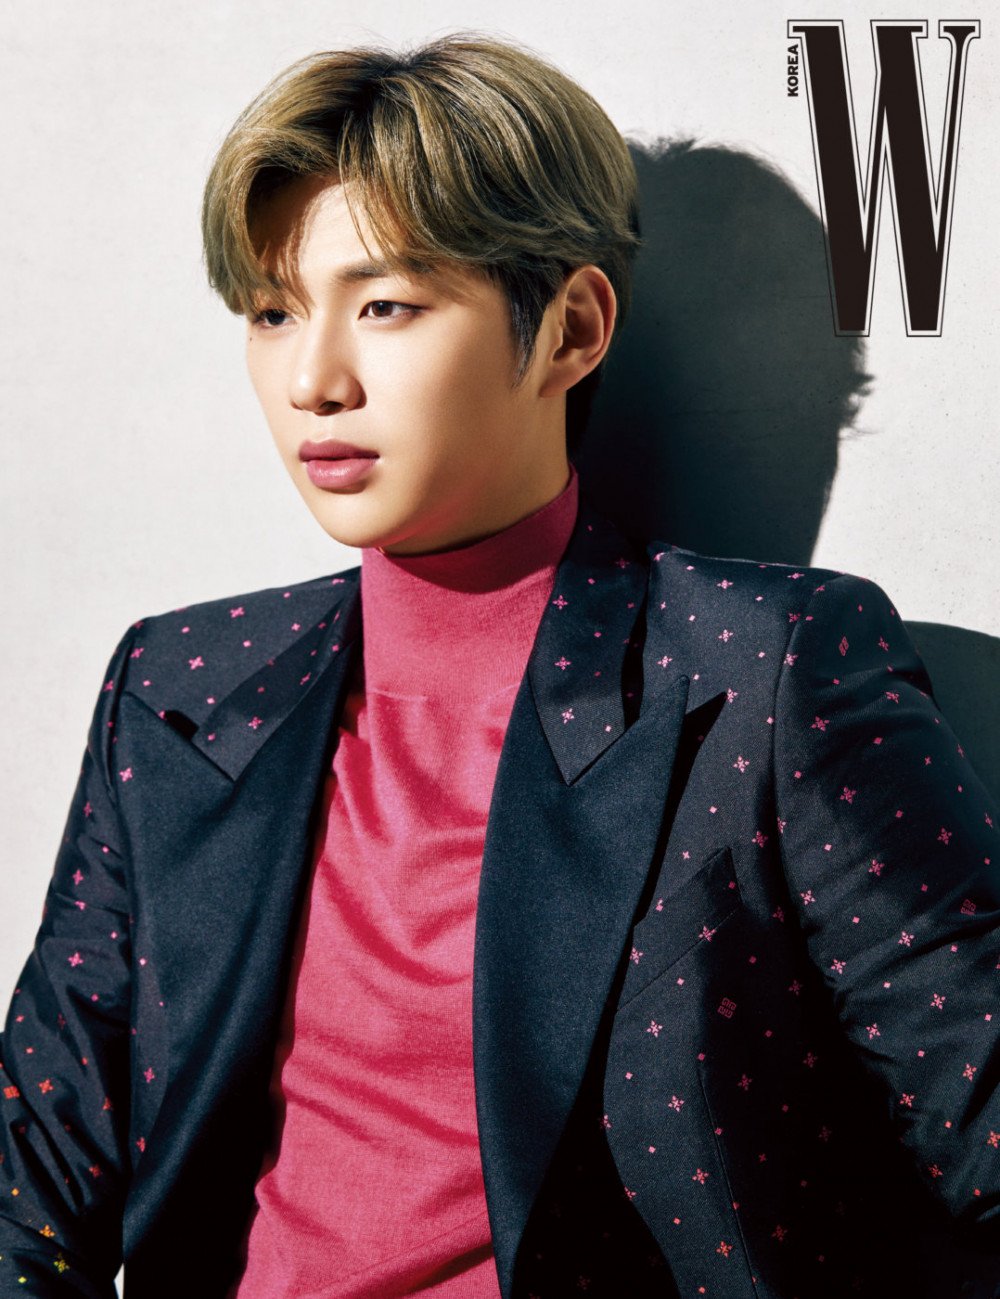 kang-daniel-shows-off-his-romantic-charm-in-blackpastel-5